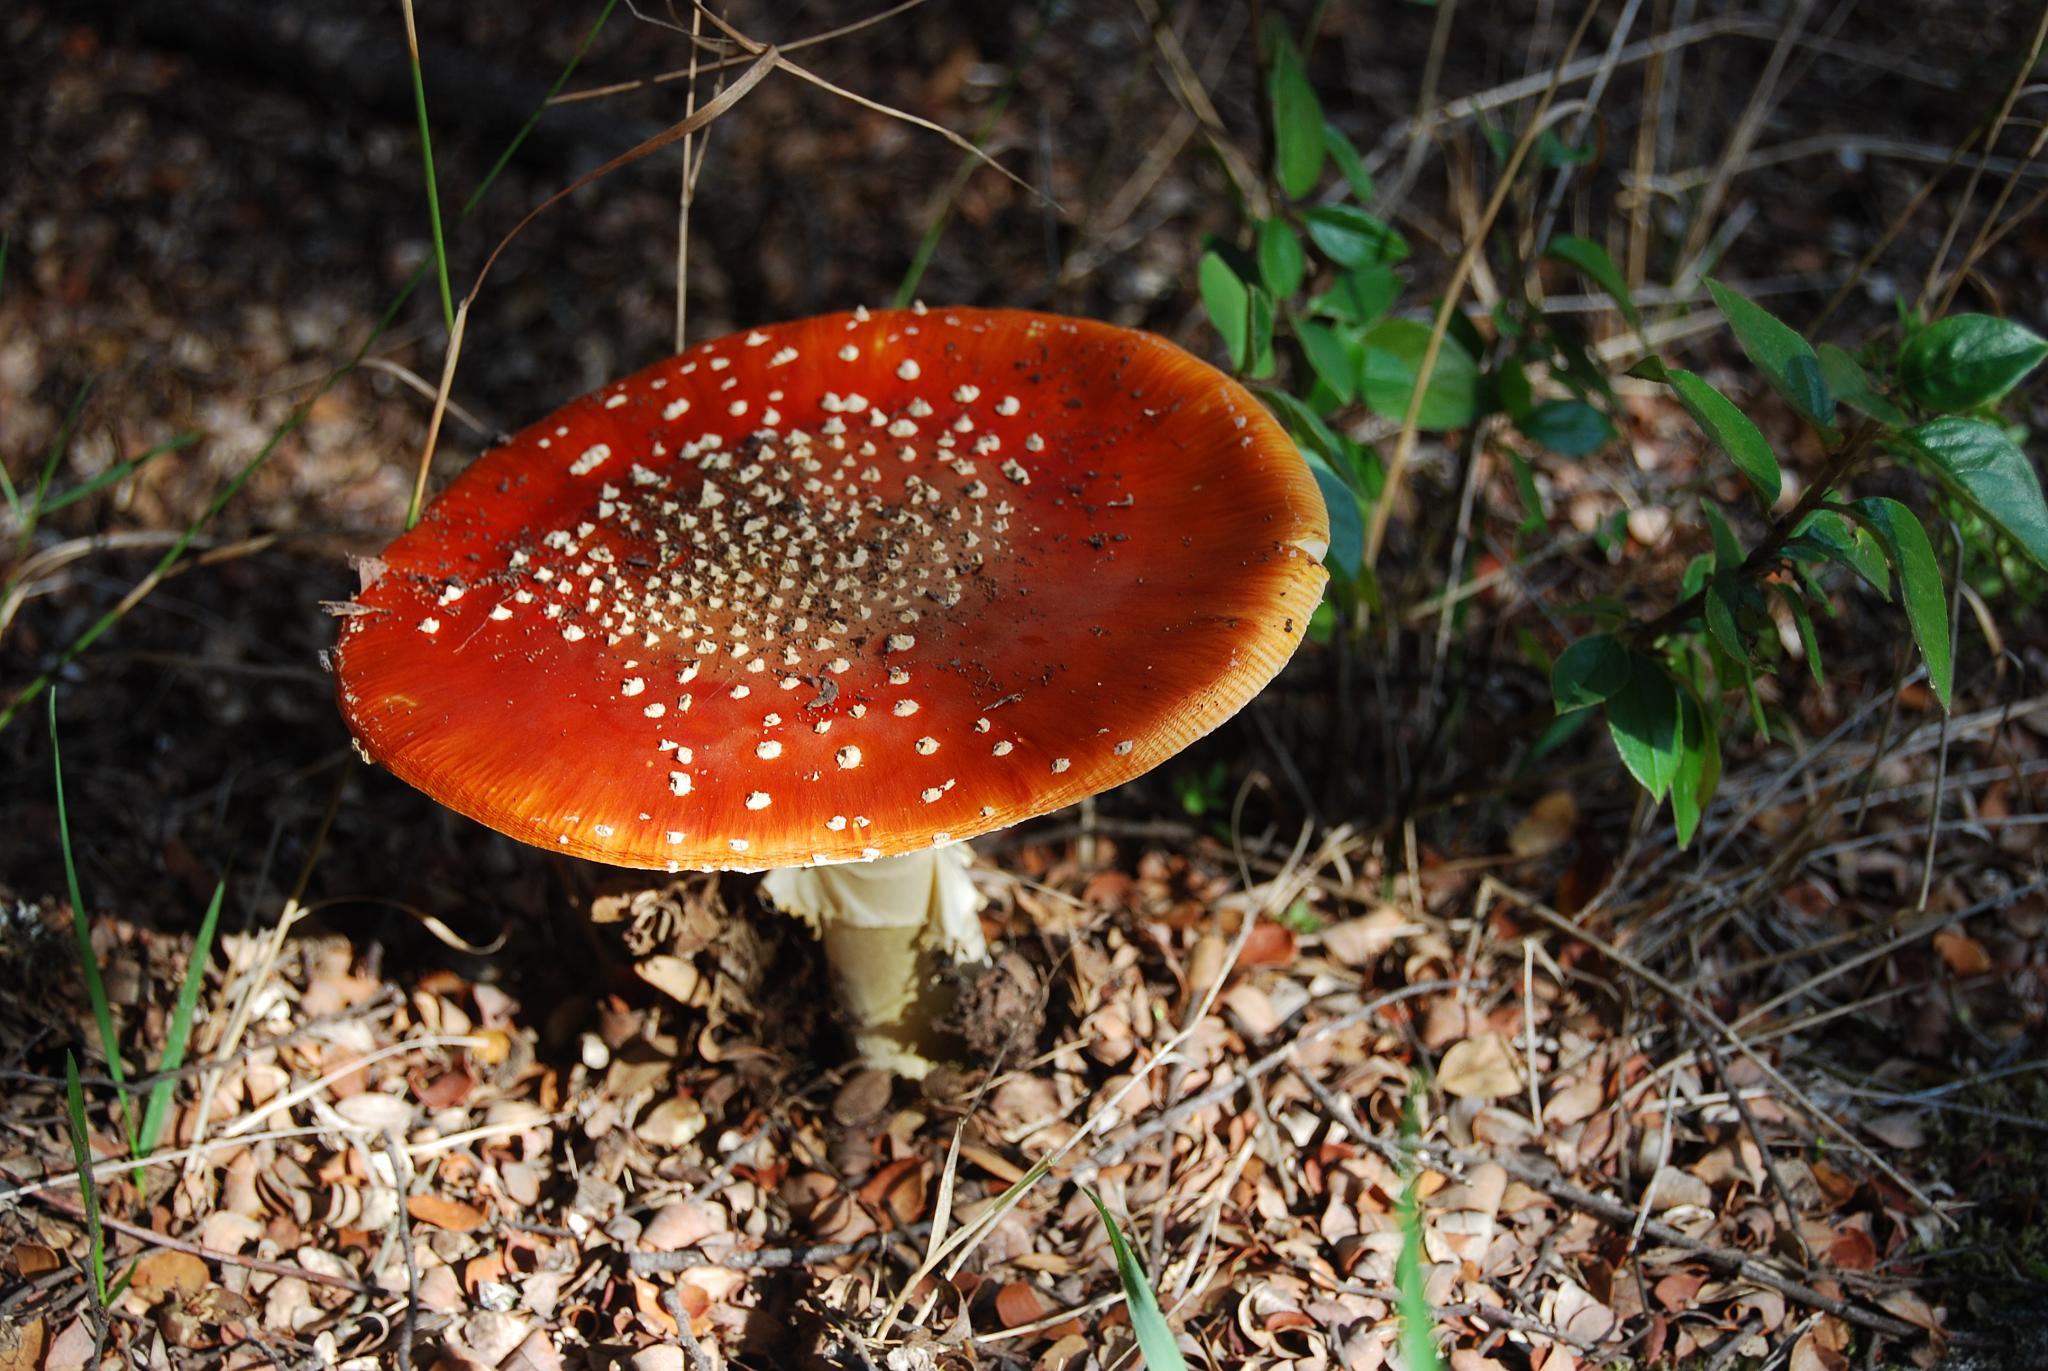 this is an image of a mushroom growing in the woods